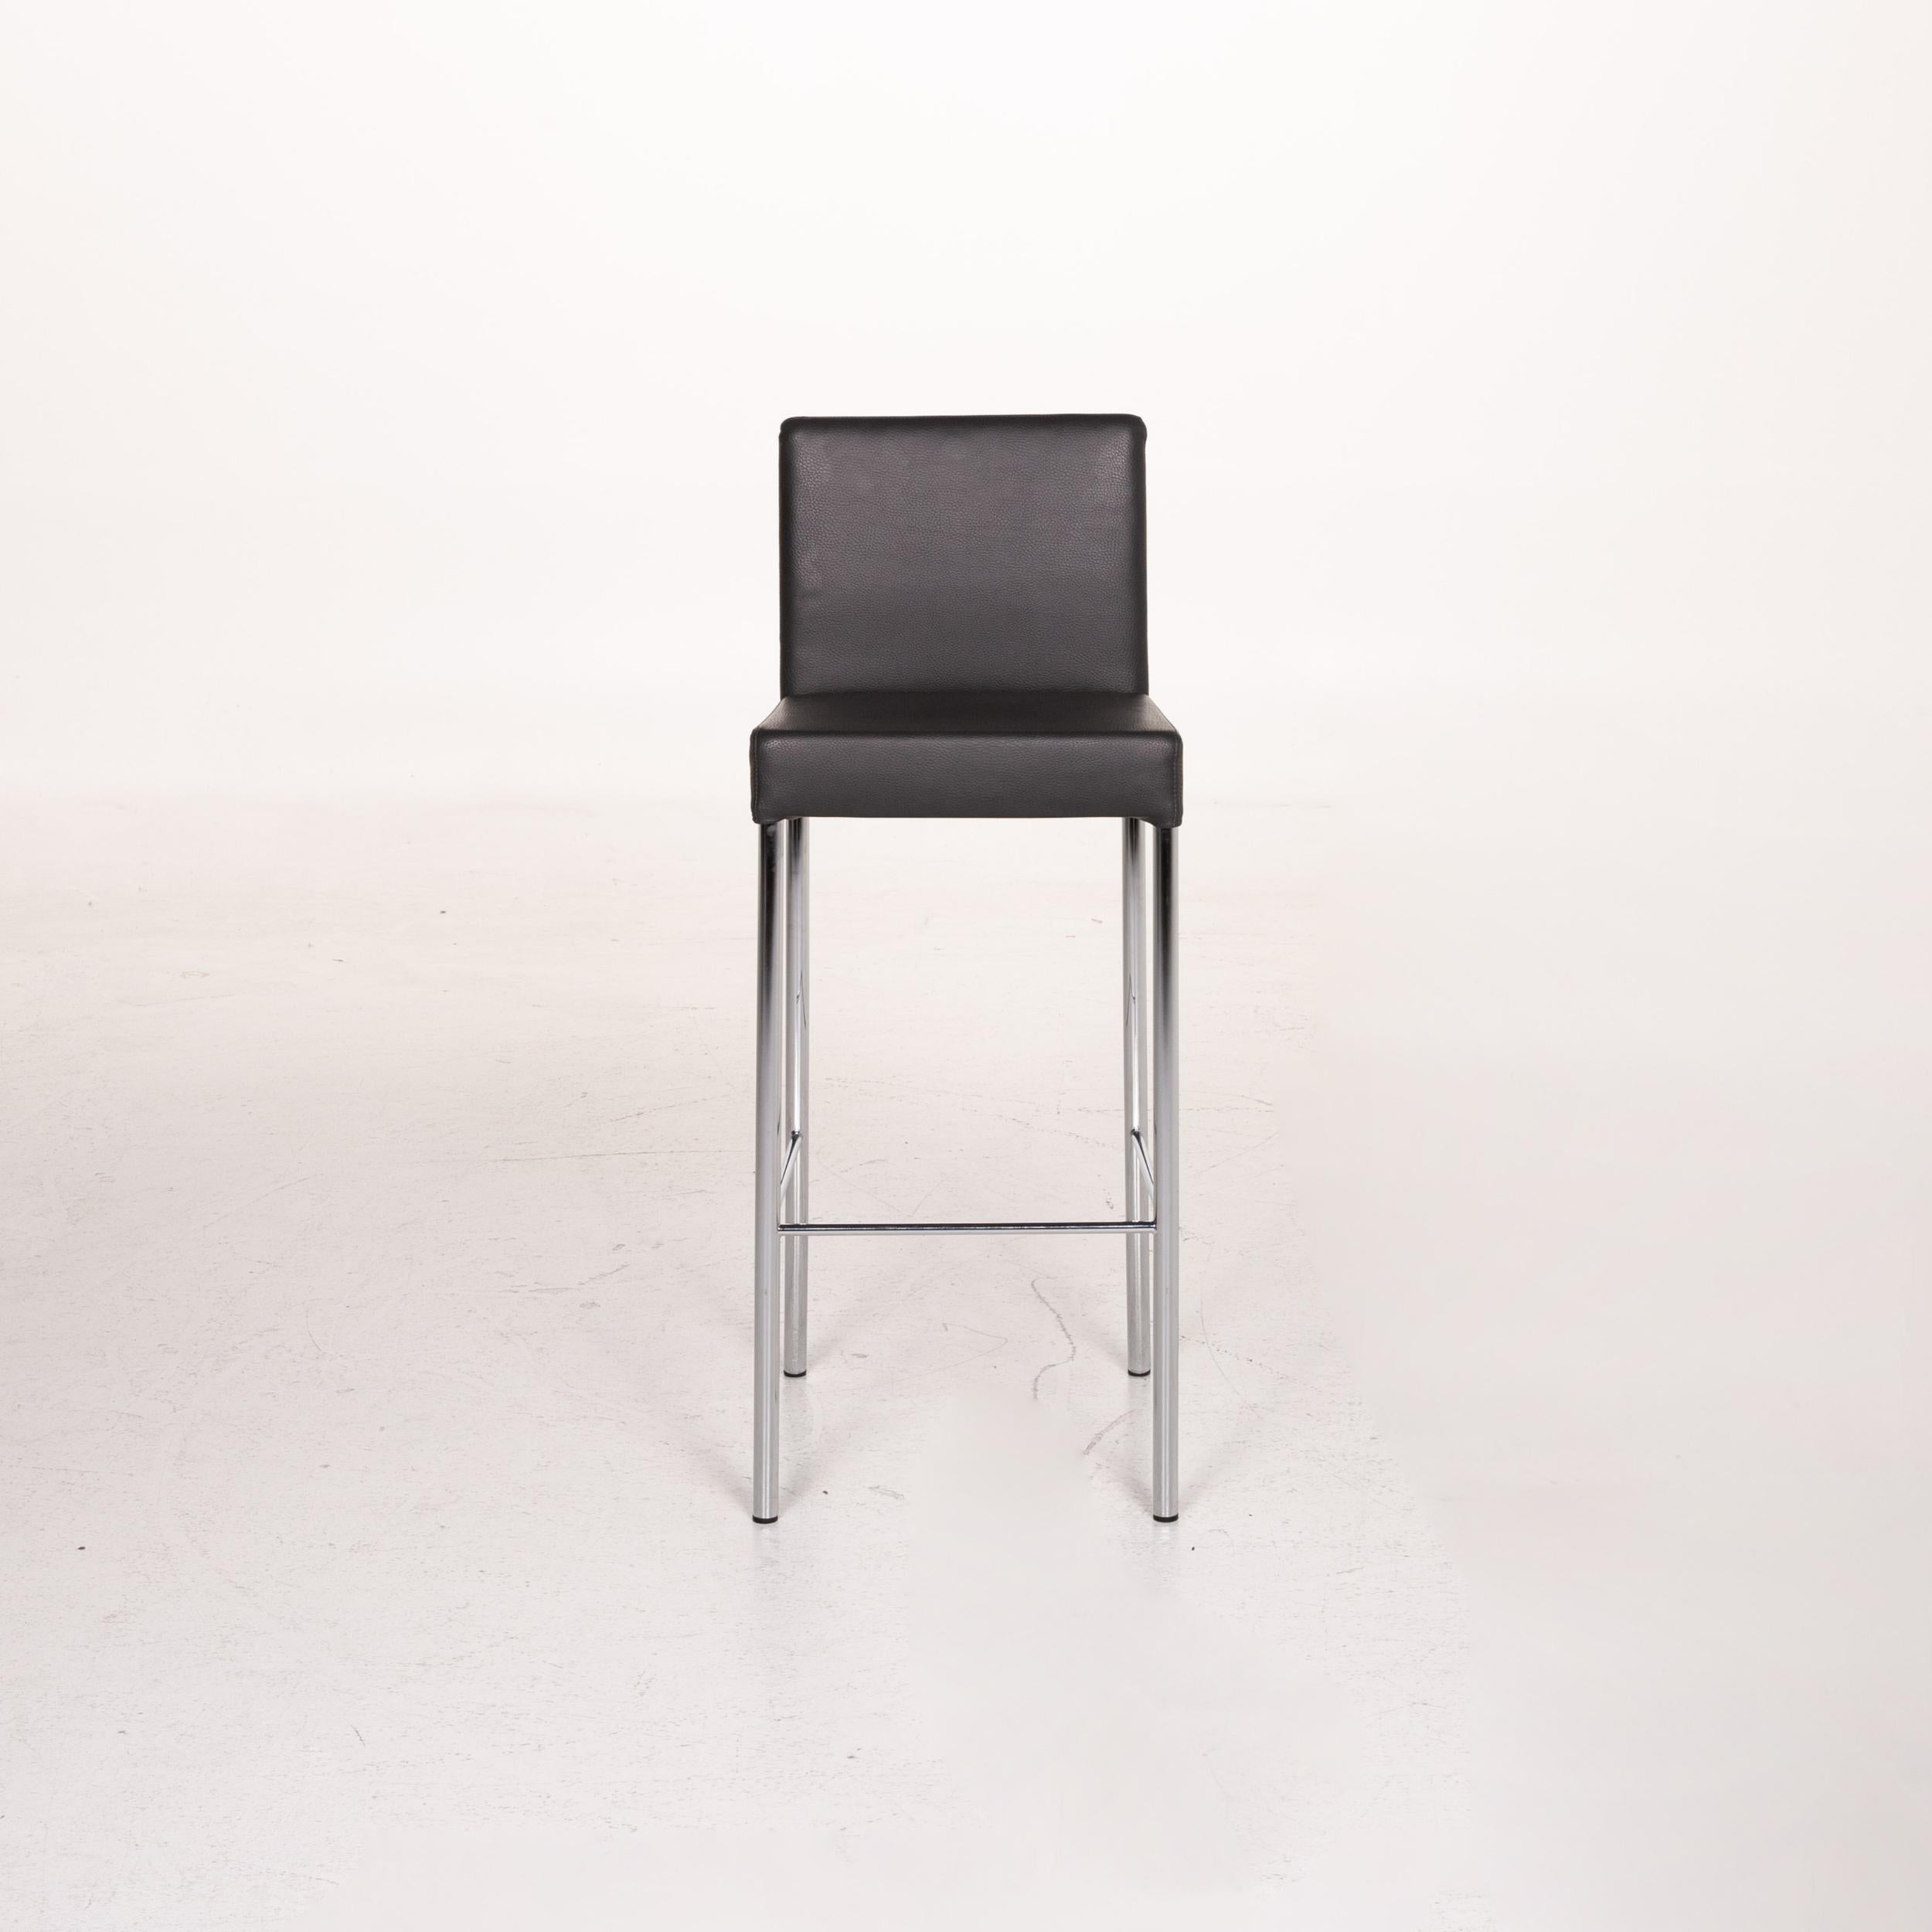 Contemporary Walter Knoll Leather Bar Stool Anthracite Gray Chair For Sale